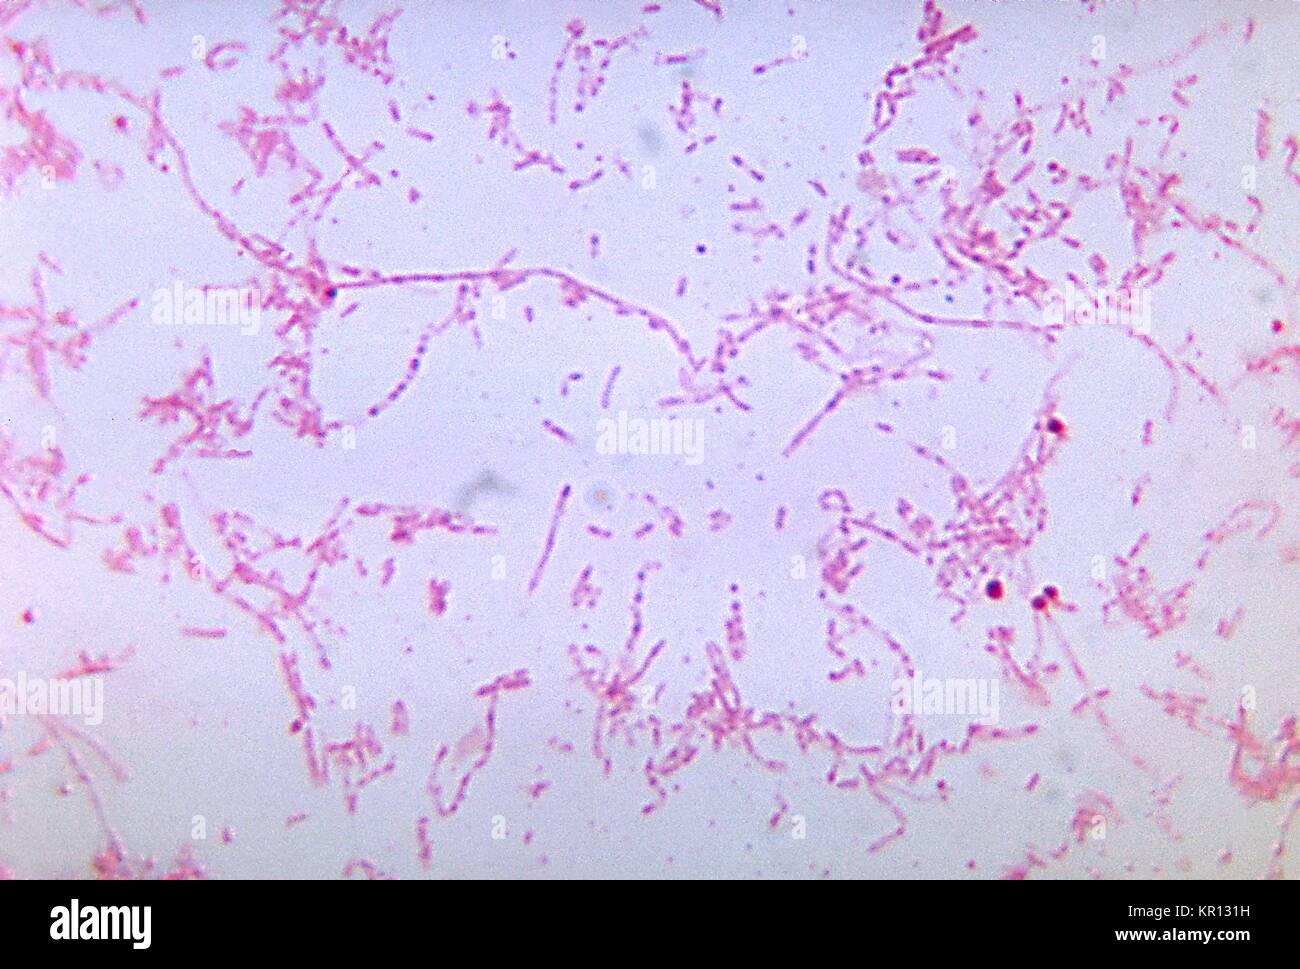 This photomicrograph shows Fusobacterium necrophorum bacteria cultured in a thioglycollate medium for 48 hours, 1972. F. necrophorum is a nonmotile, gram-negative anaerobe that normally inhabitants the pharynx, gastrointestinal tract, and female genital tract. It is one of the major causative agents of Lemierre?s syndrome . Image courtesy CDC/Dr. V. R. Dowell, Jr. Stock Photo